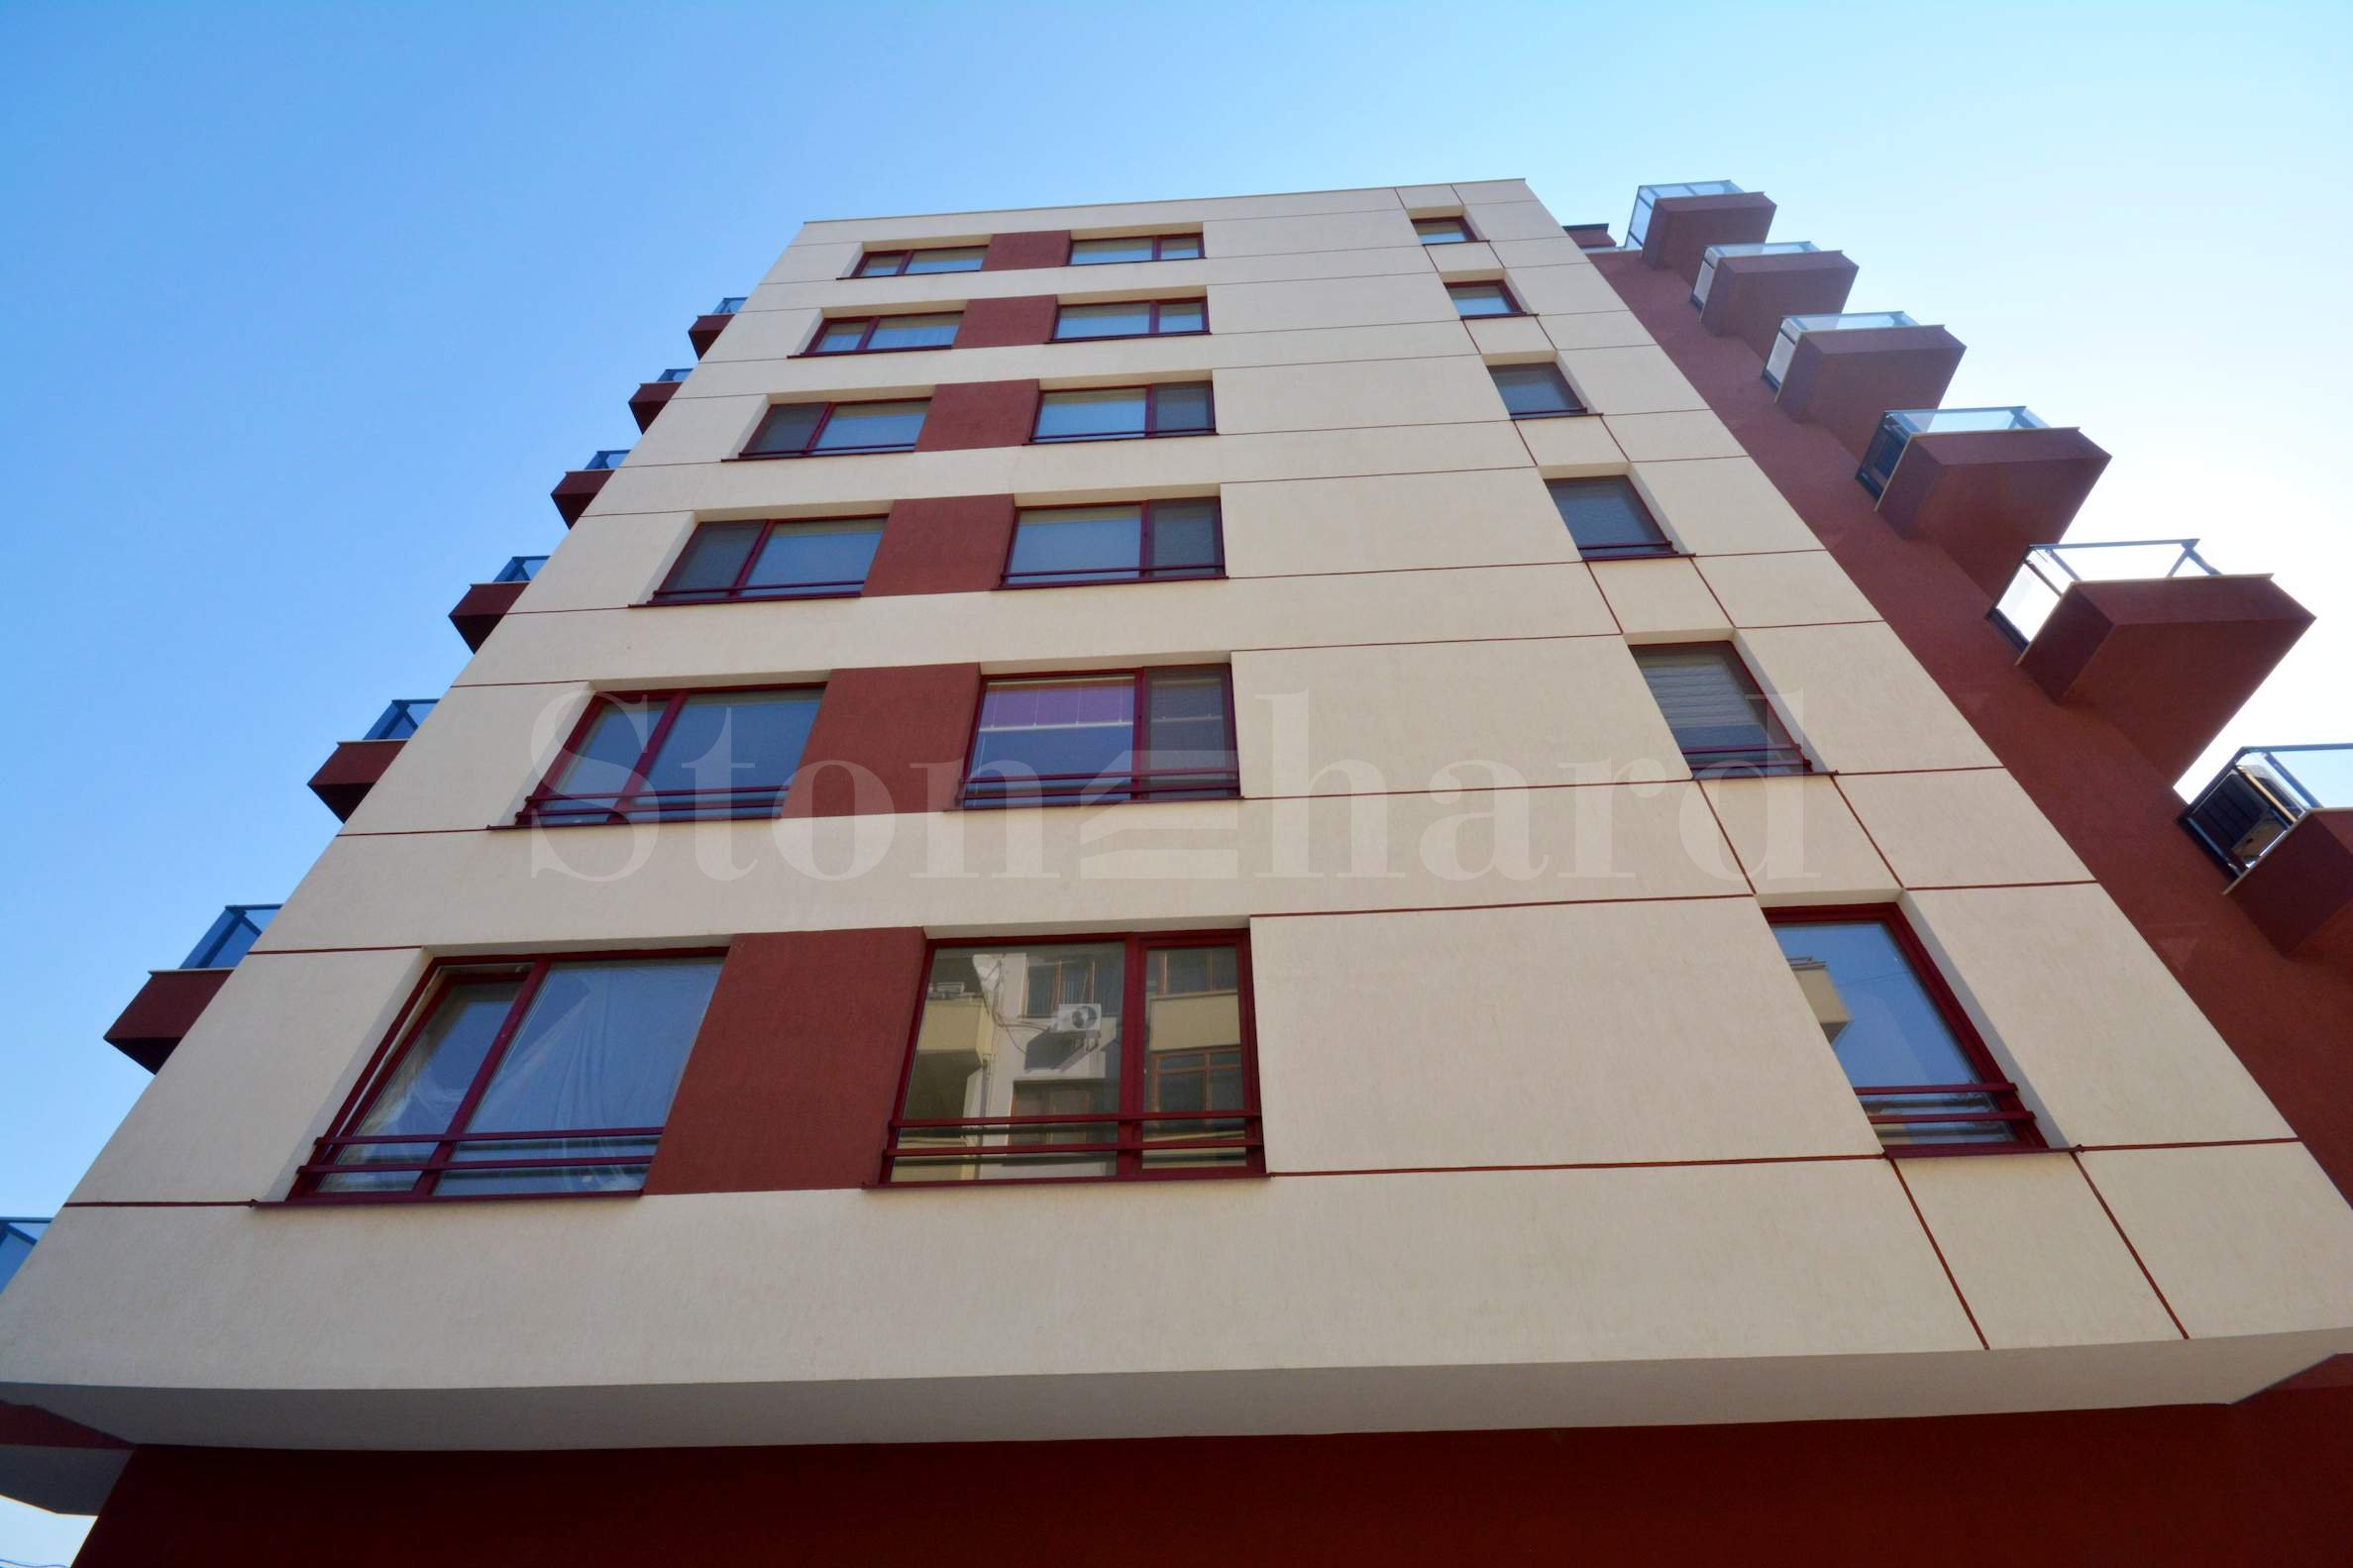 Residential Complex with stylish apartments near the center of Plovdiv2 - Stonehard